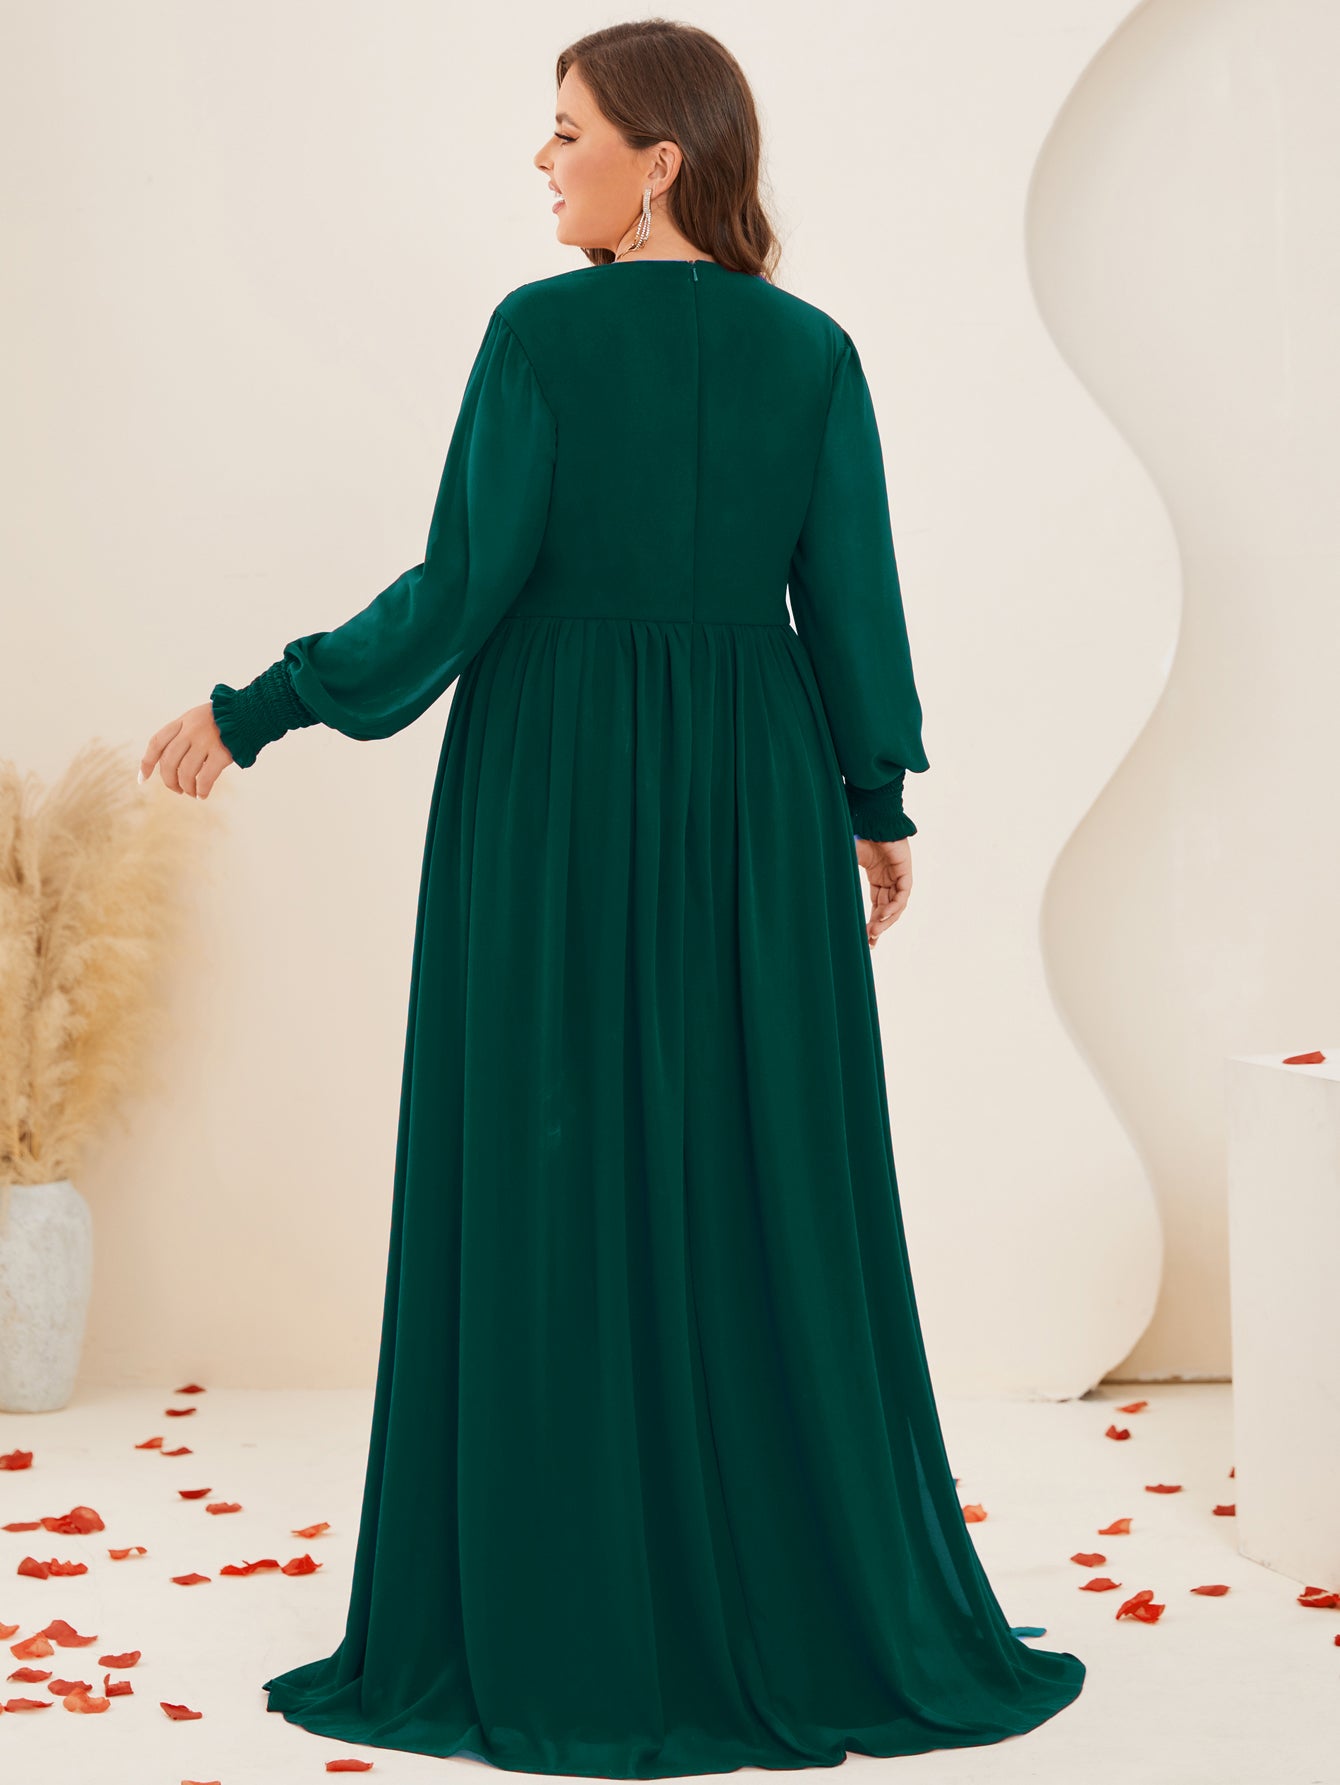 Women Plus Size V-neck Chiffon Long Sleeve Evening Dresses for Bridesmaid Party